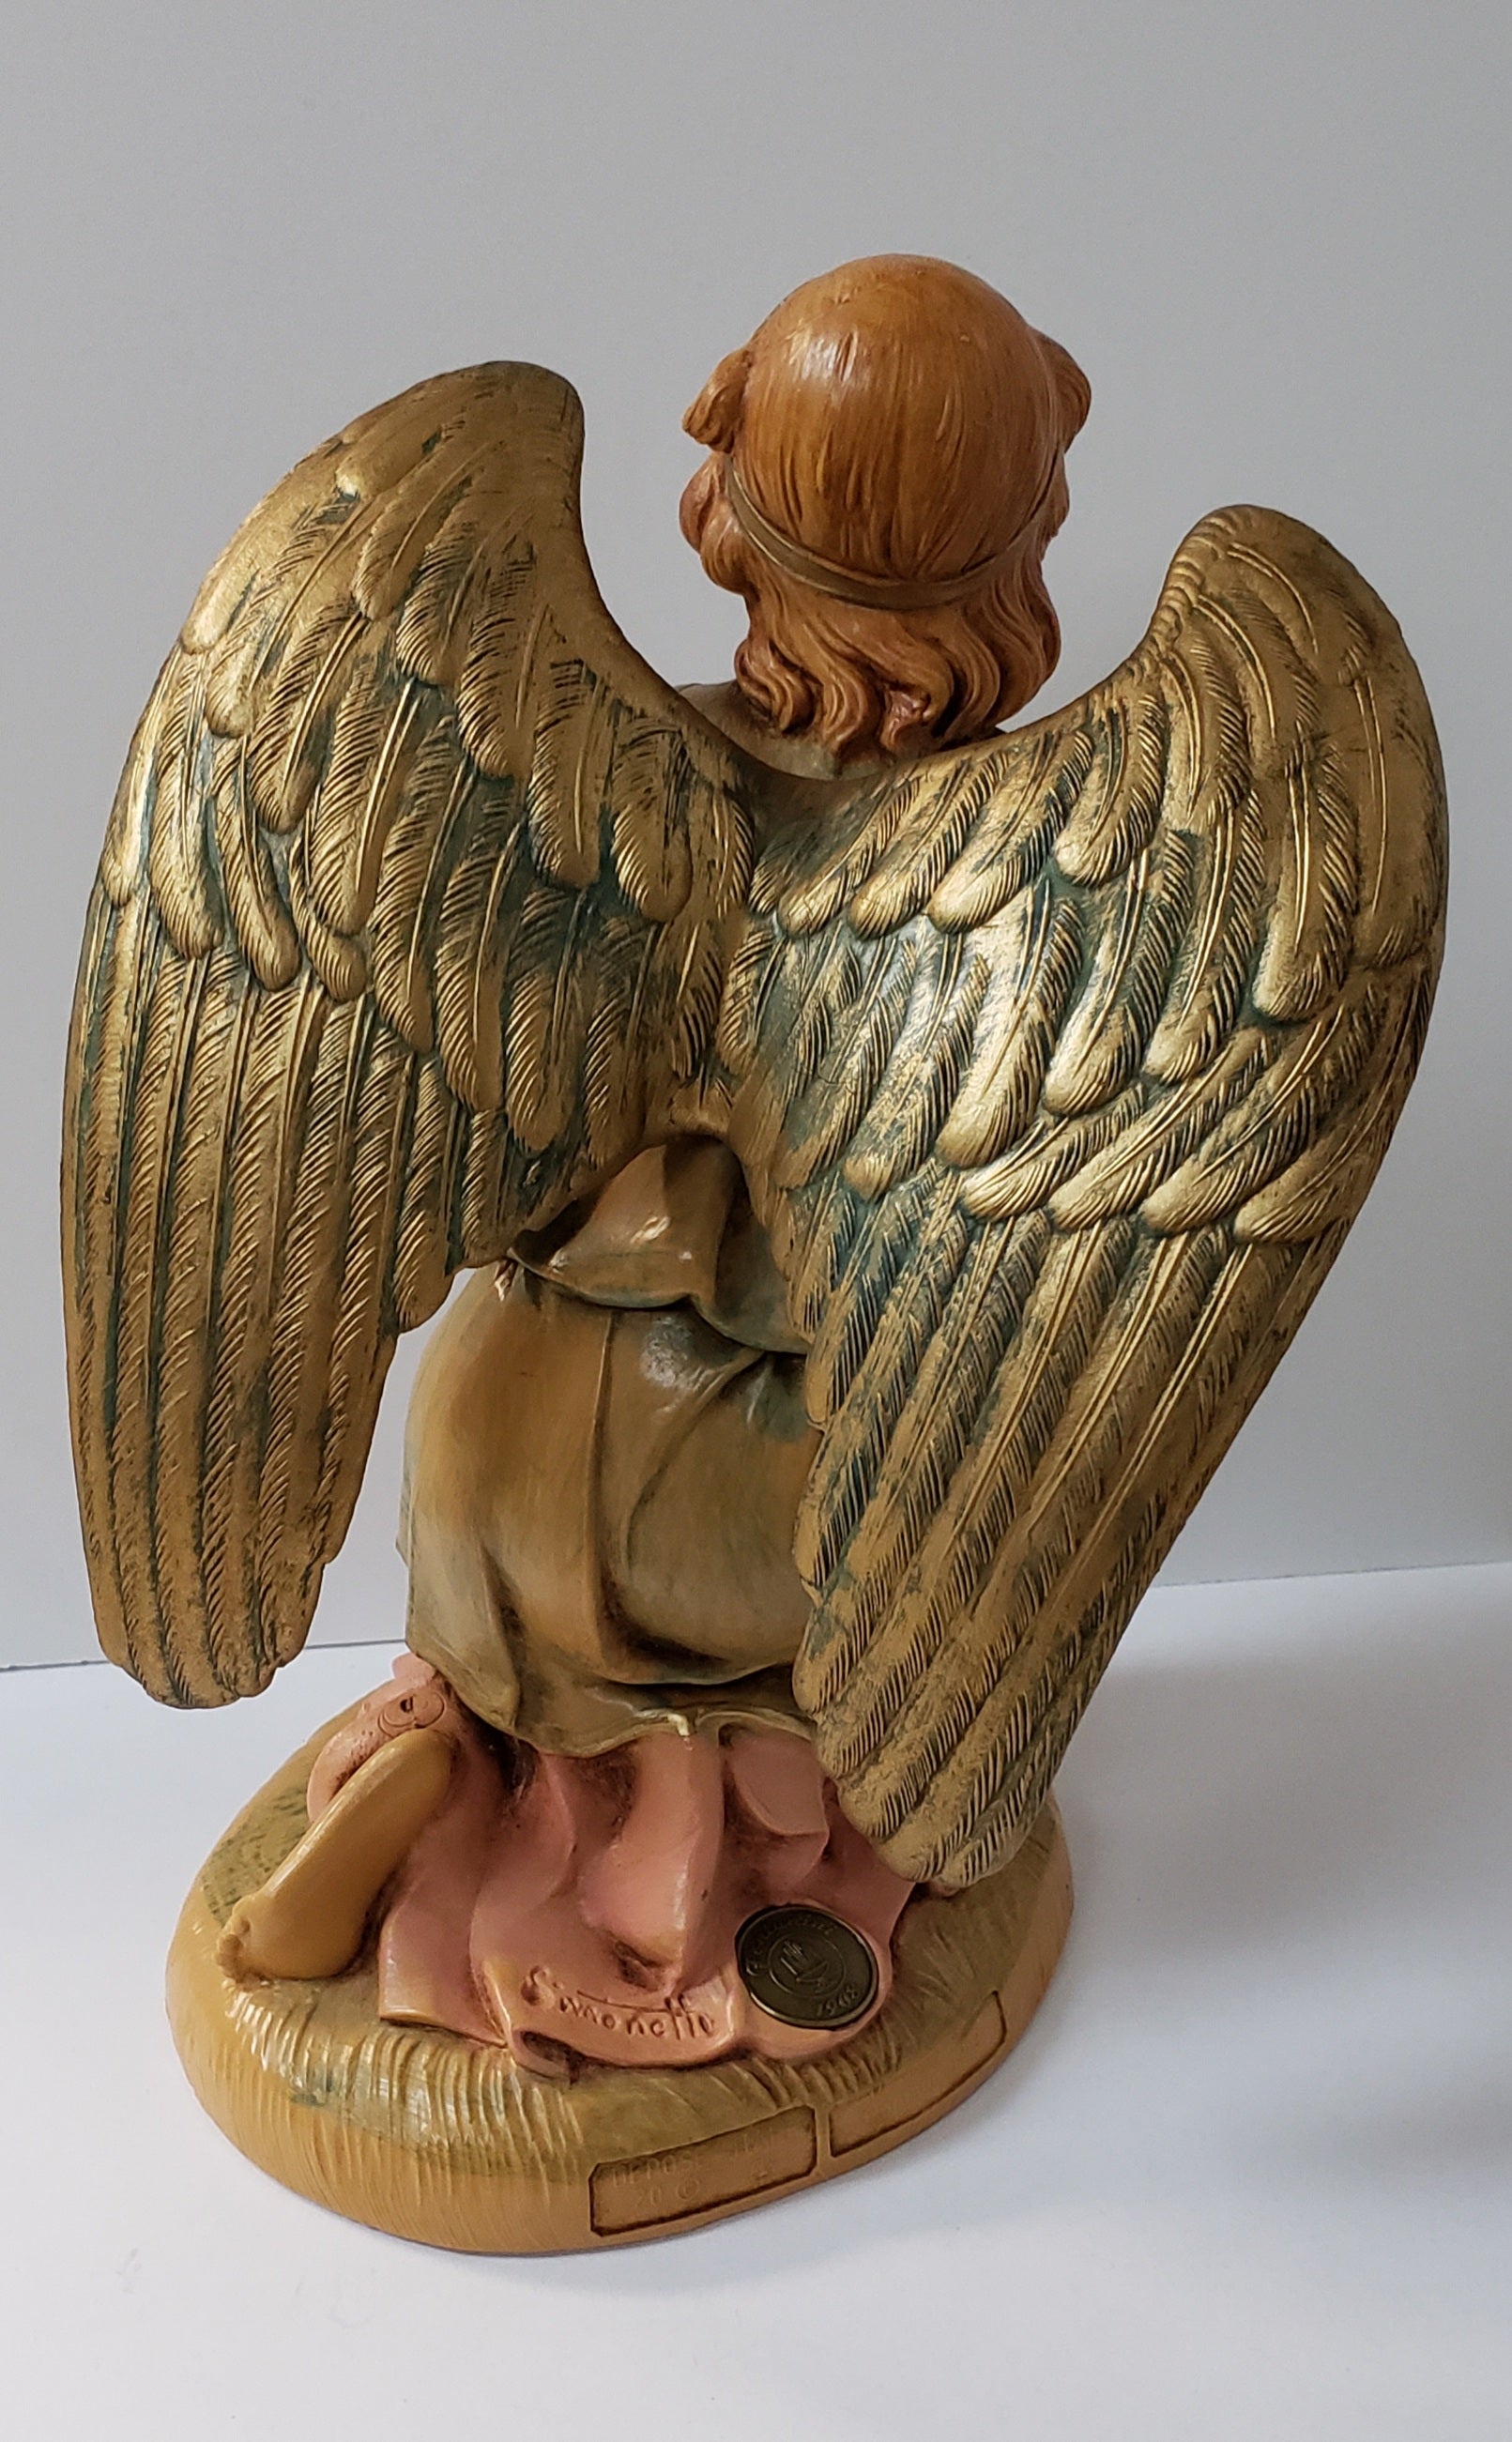 12 Inch Scale Angel by Fontanini